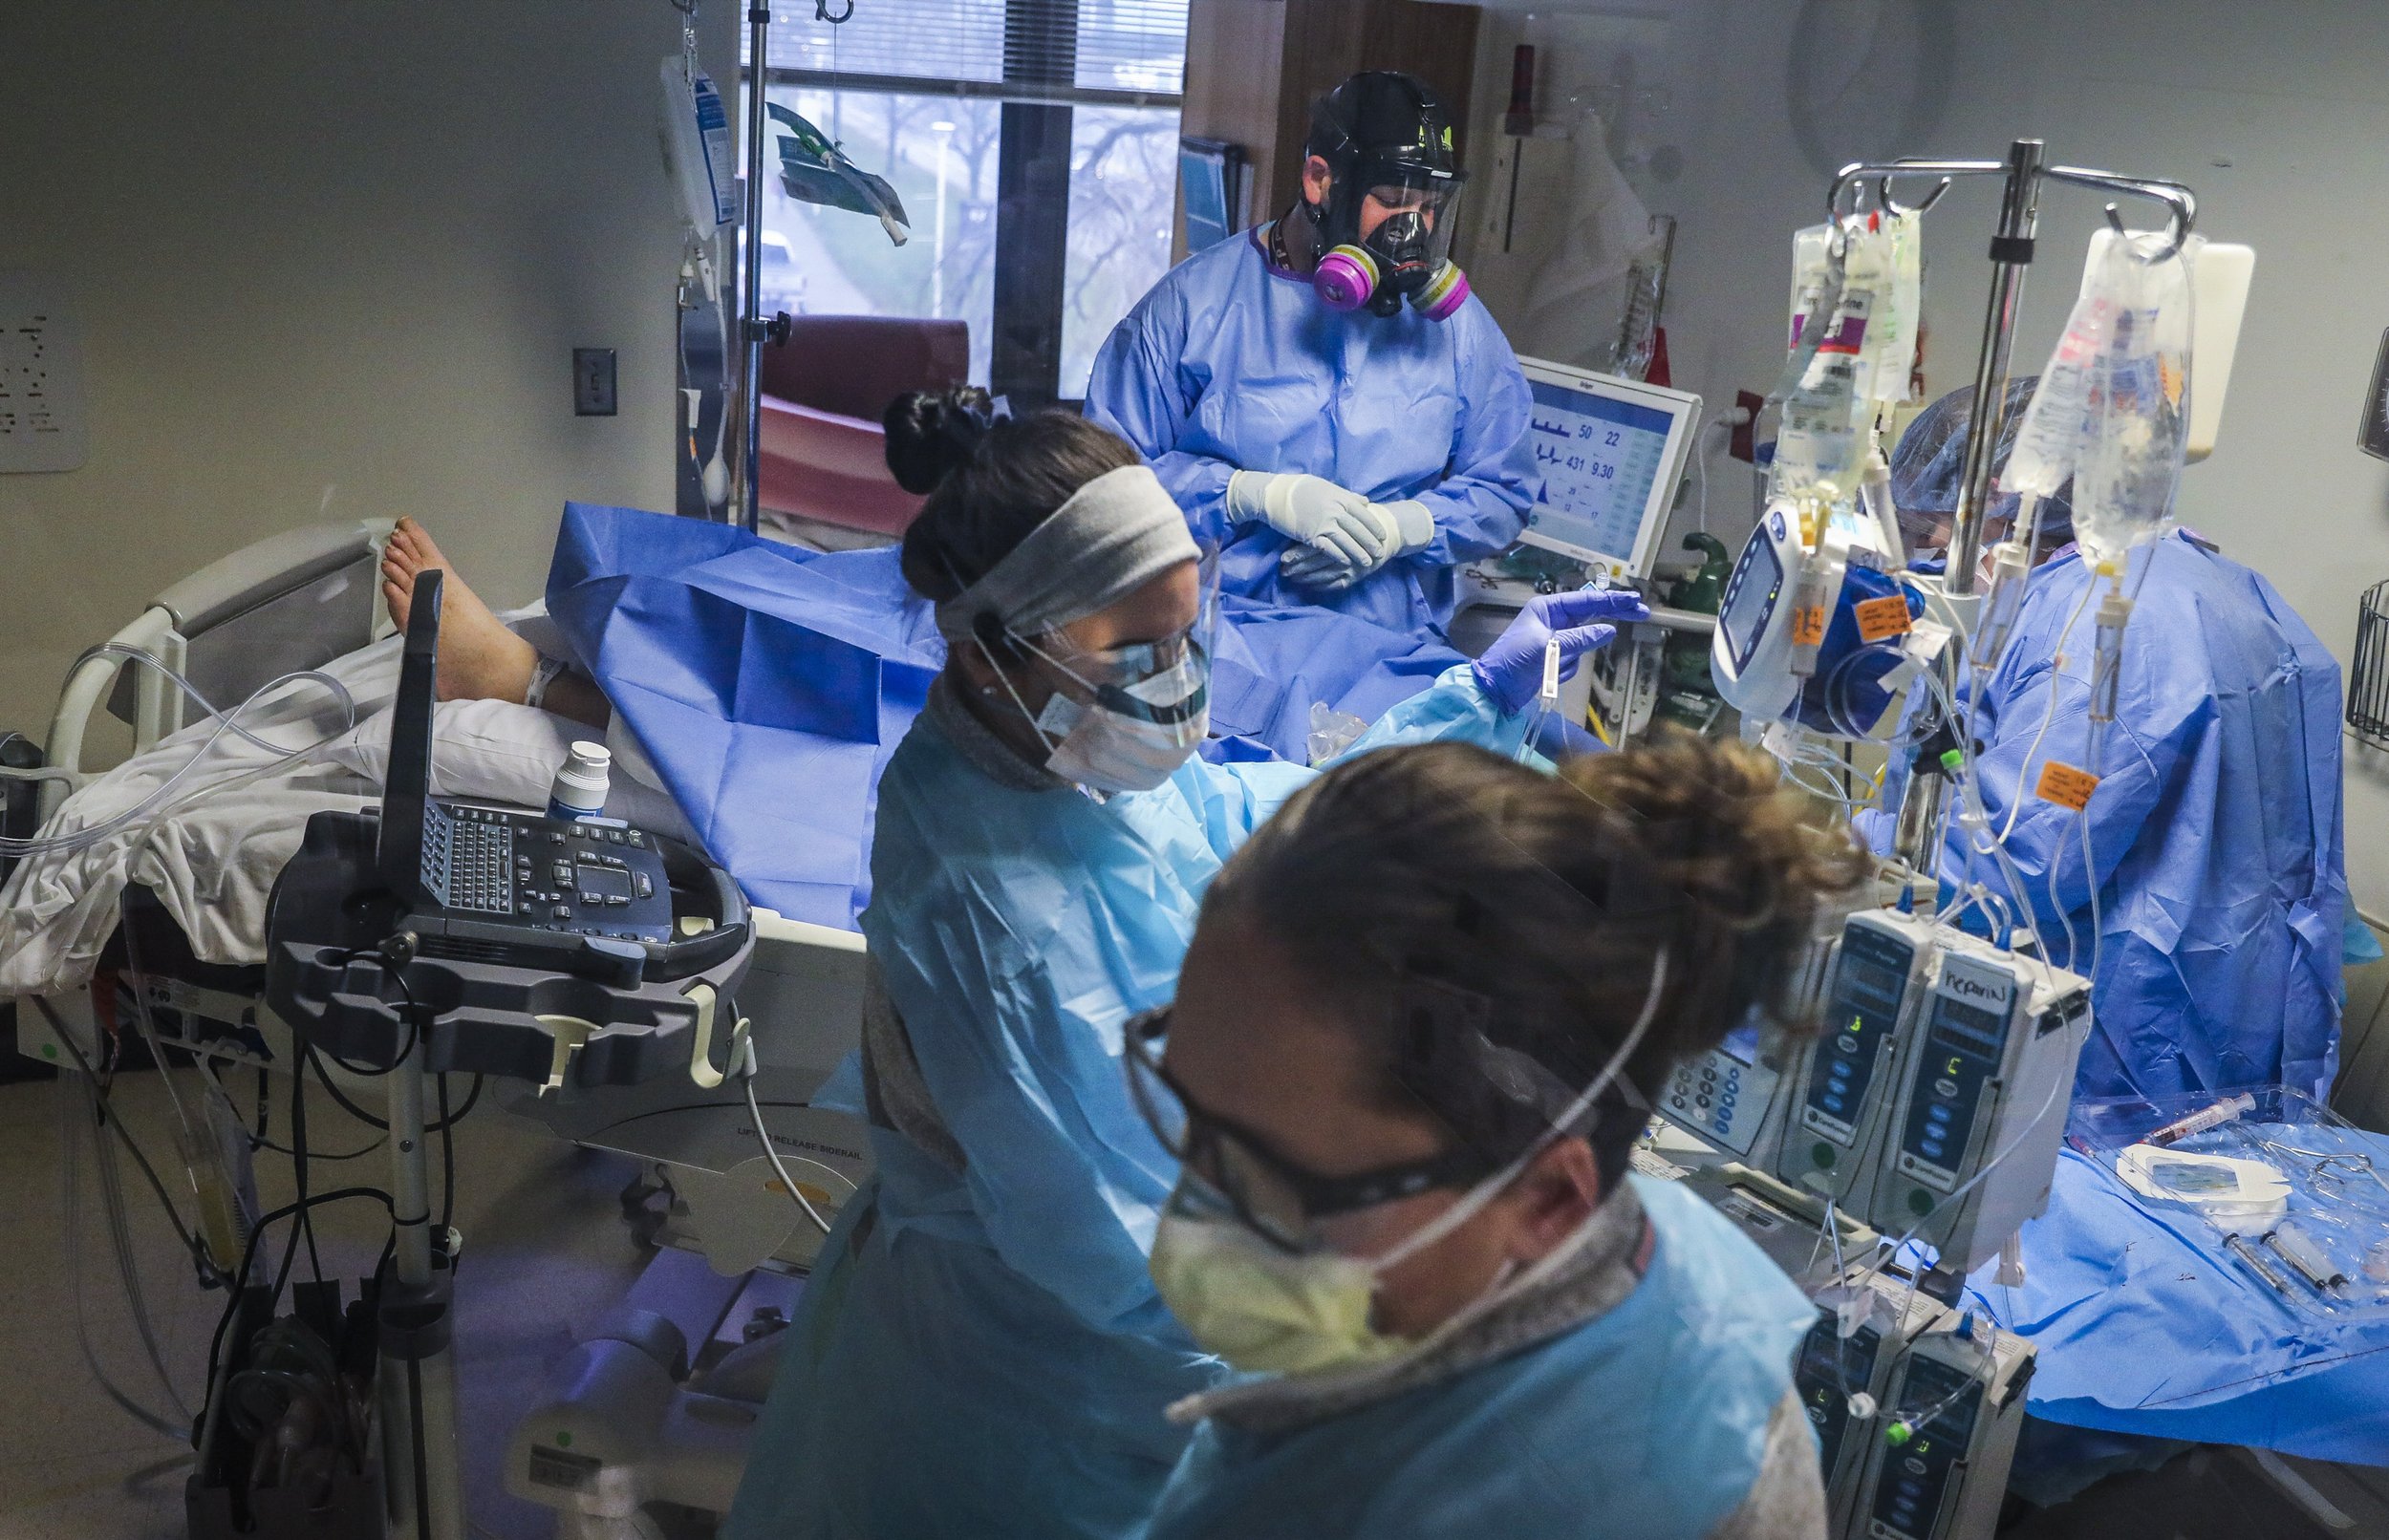  Healthcare workers work together to put in a dialysis line for a patient while working in the COVID-19 Intensive Care Unit at UMass Memorial Medical Center in Worcester, MA on December 29, 2021. As COVID-19 cases spike and the pandemic ravages on, h